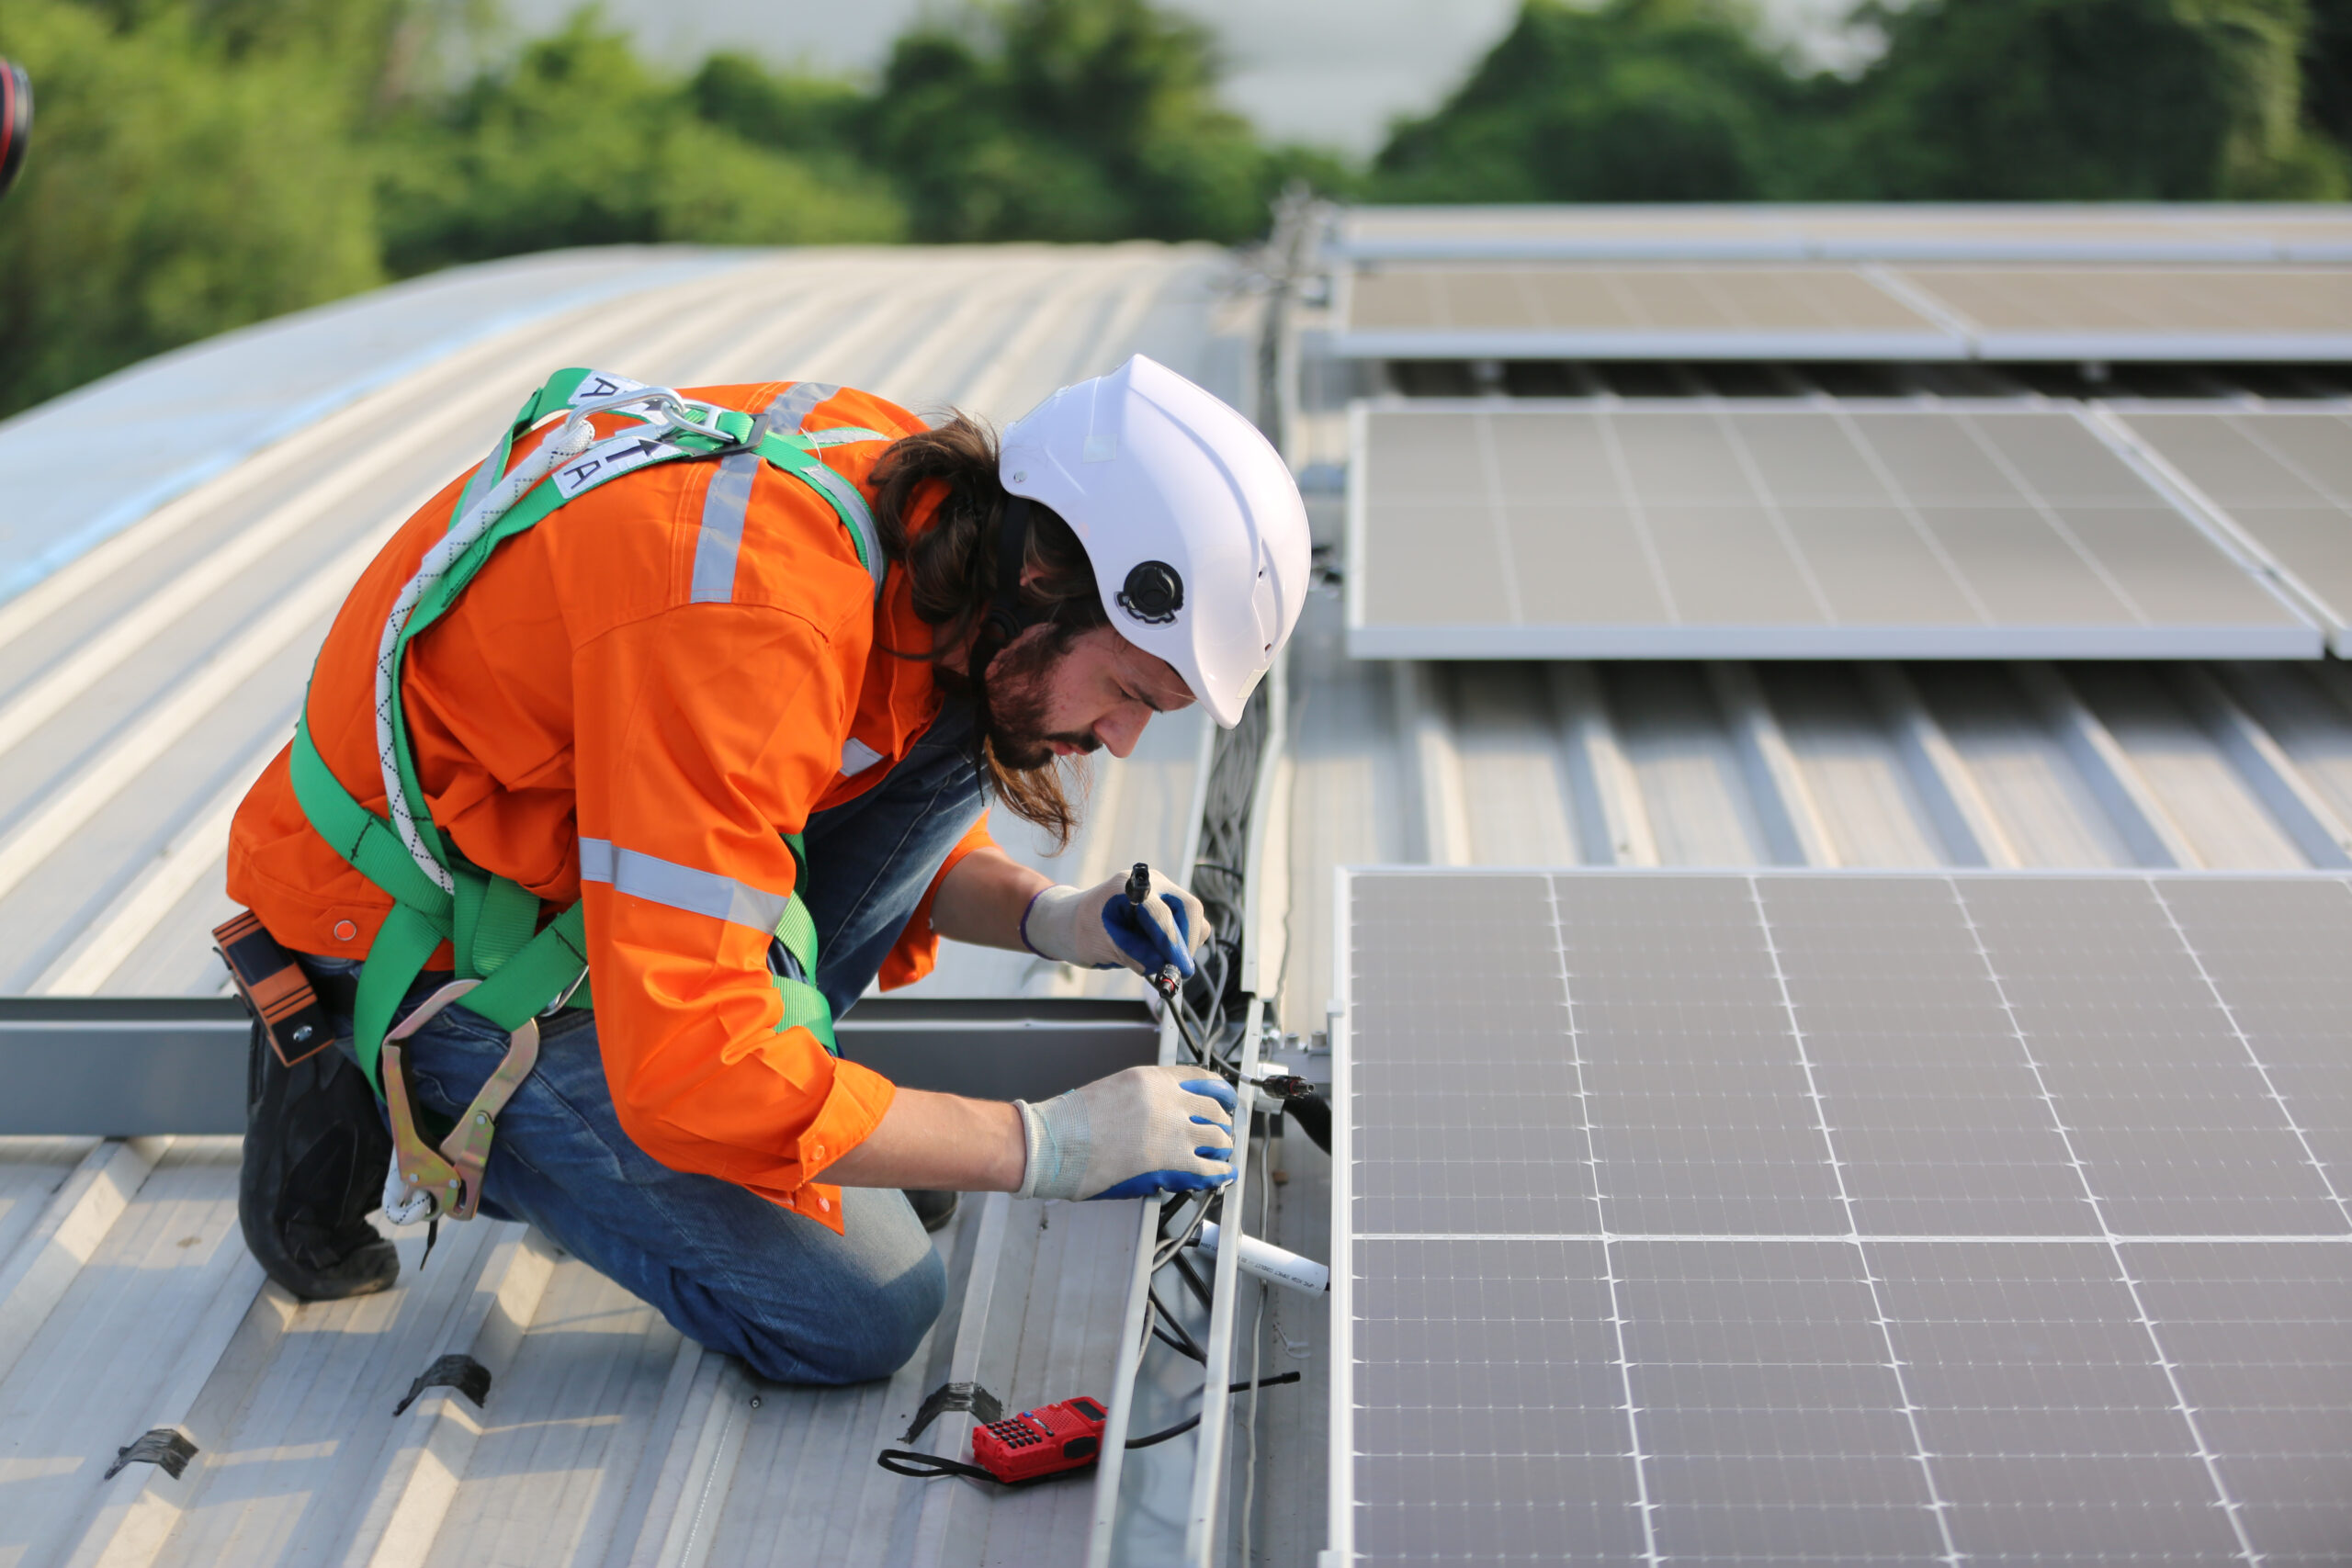 professional worker installing solar panels on the roof of a house.